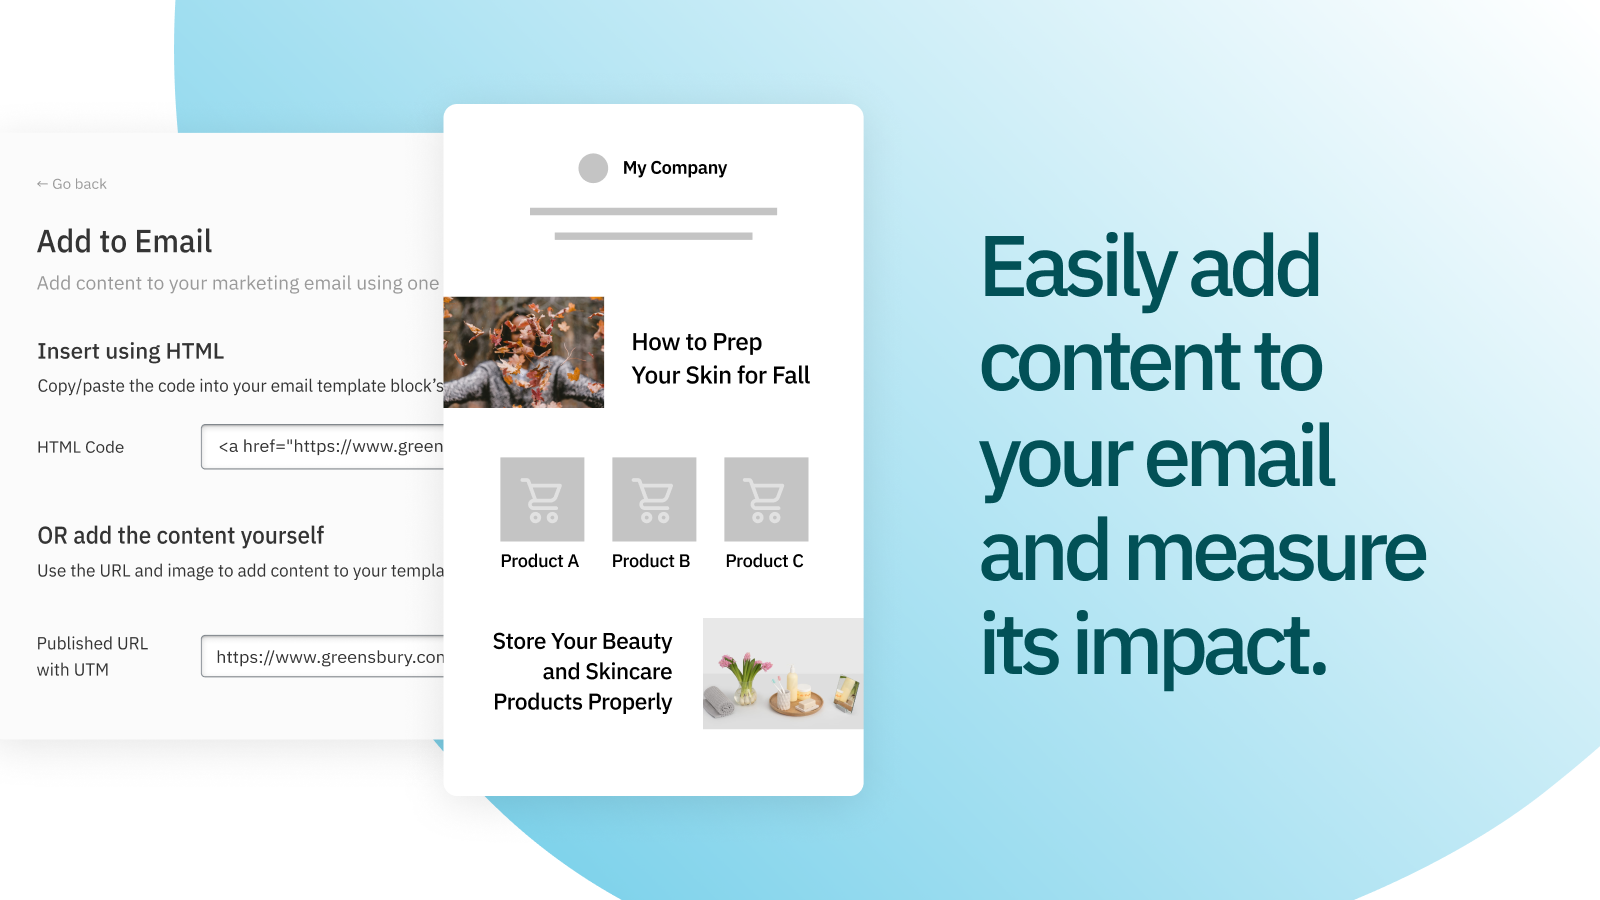 Easily add content to your email and measure its impact.